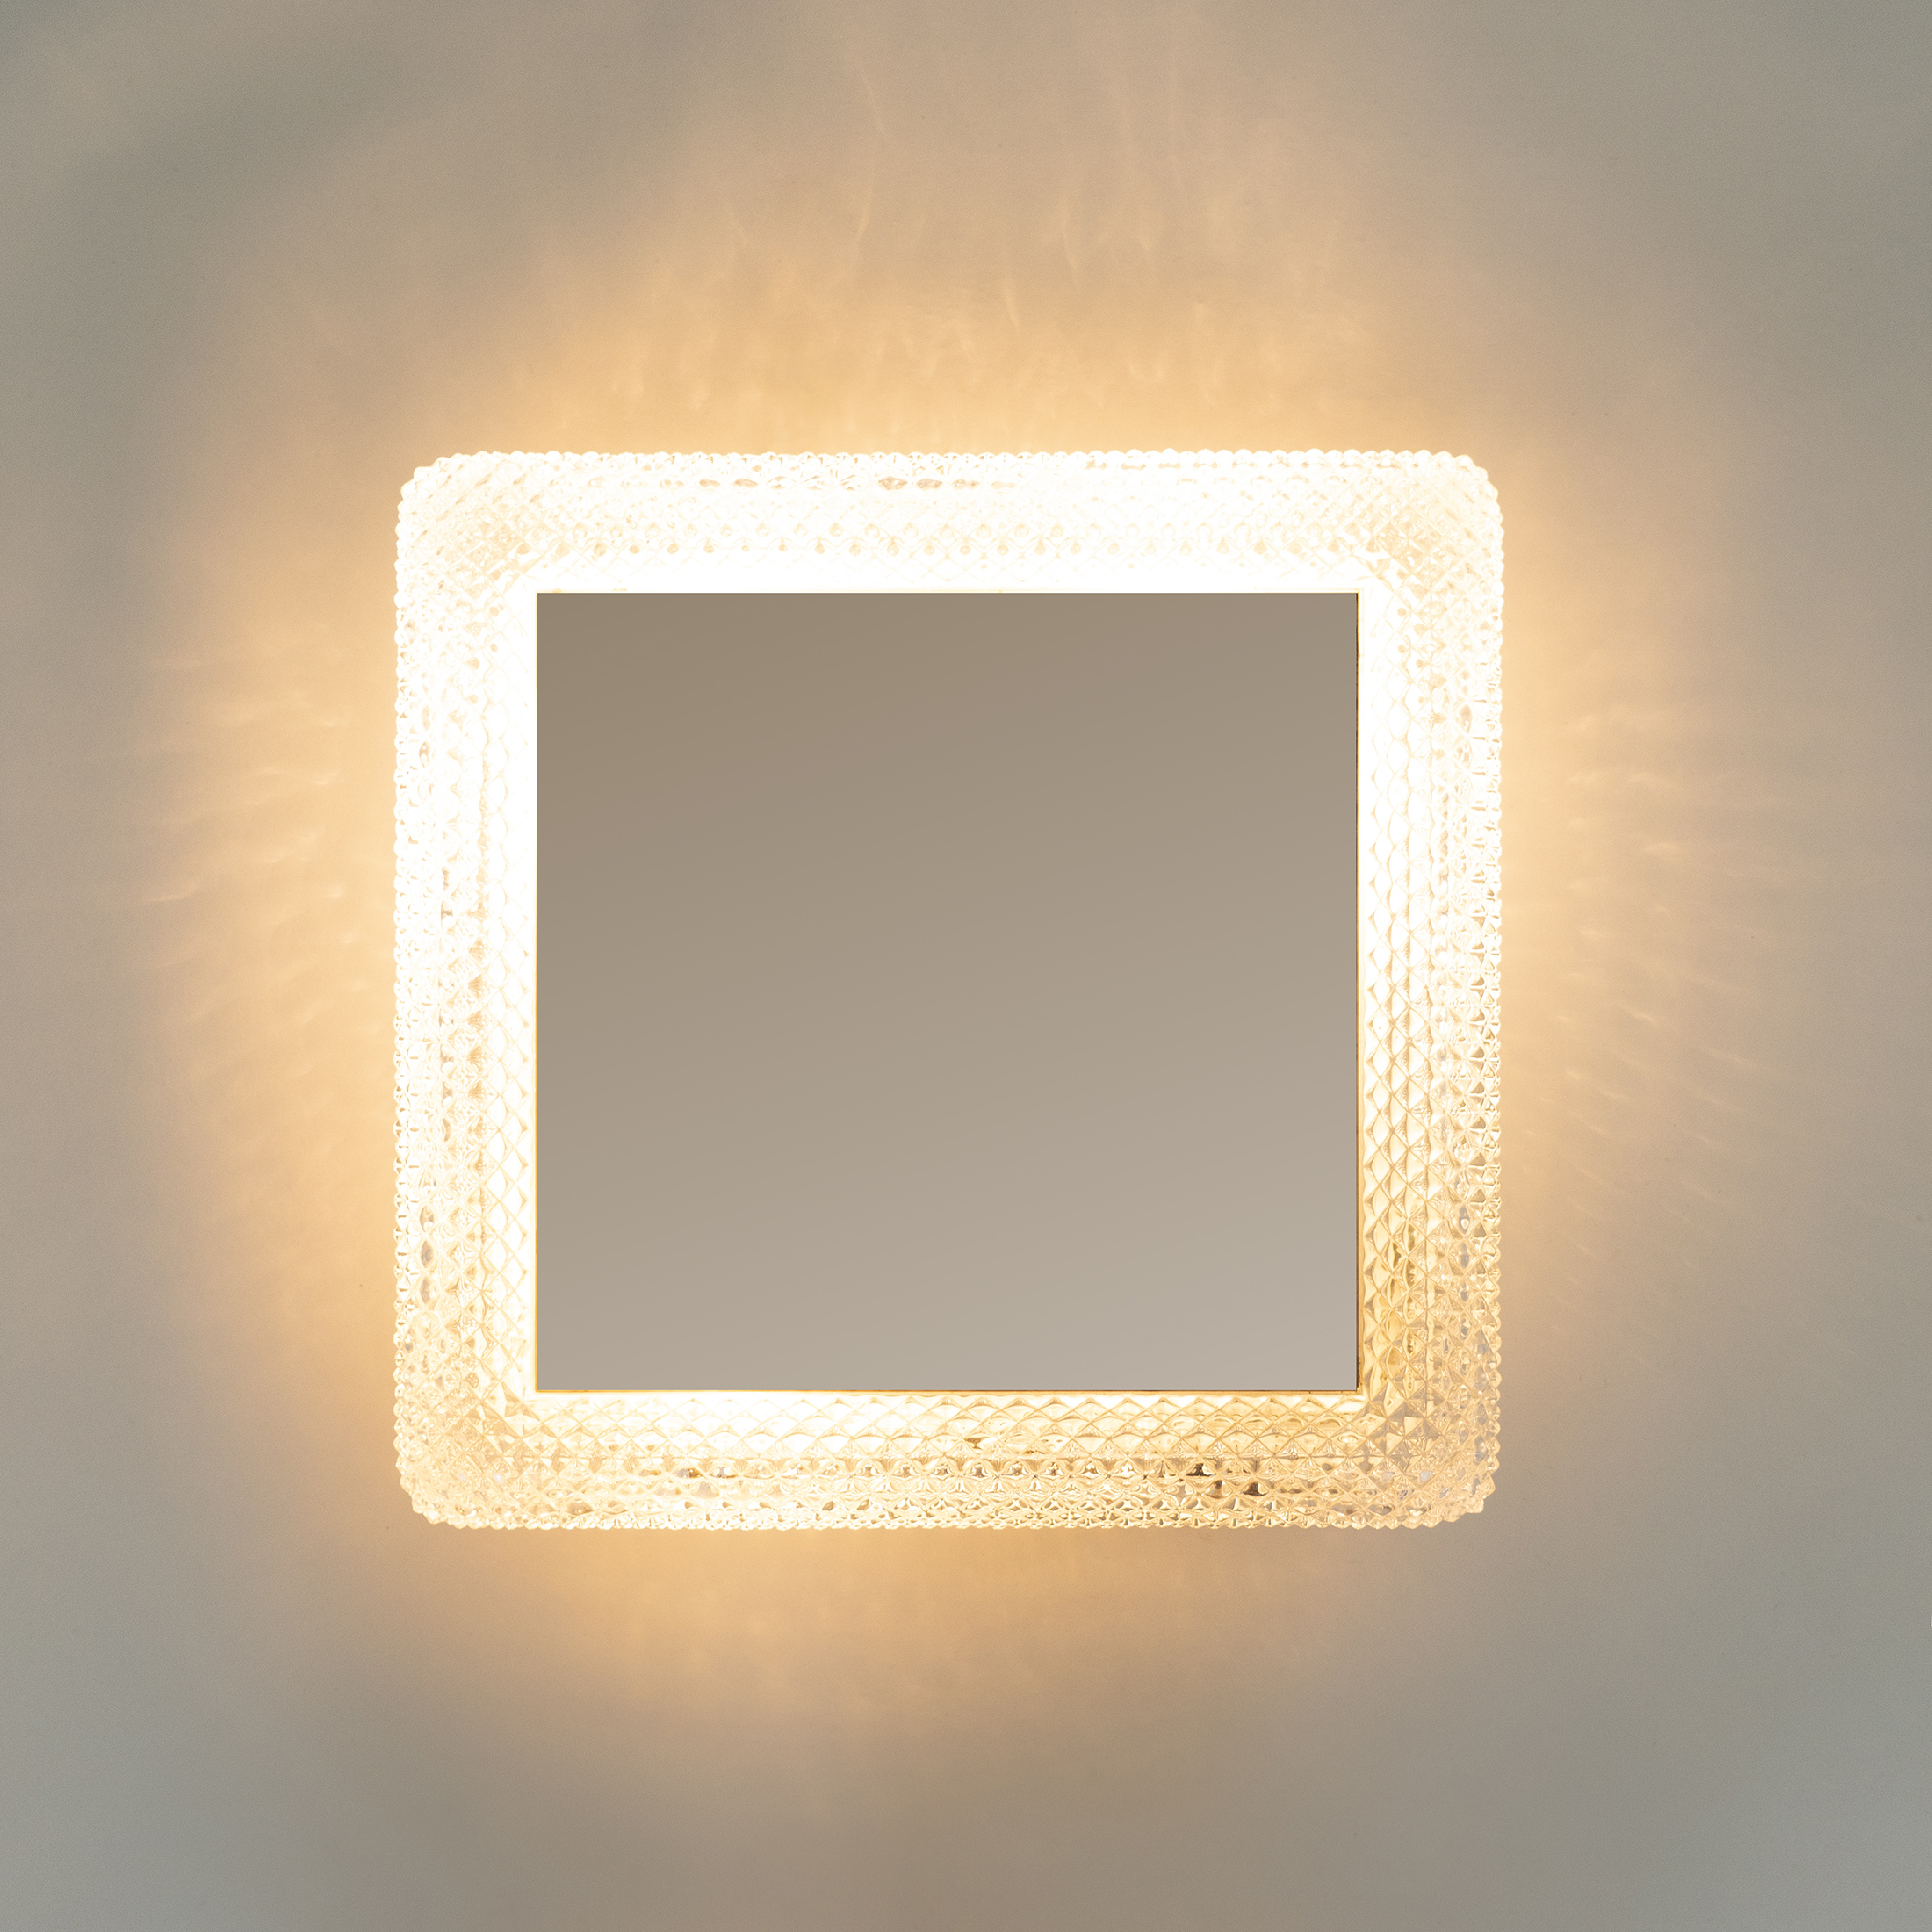 The image for Square Backlit Mirror 0401